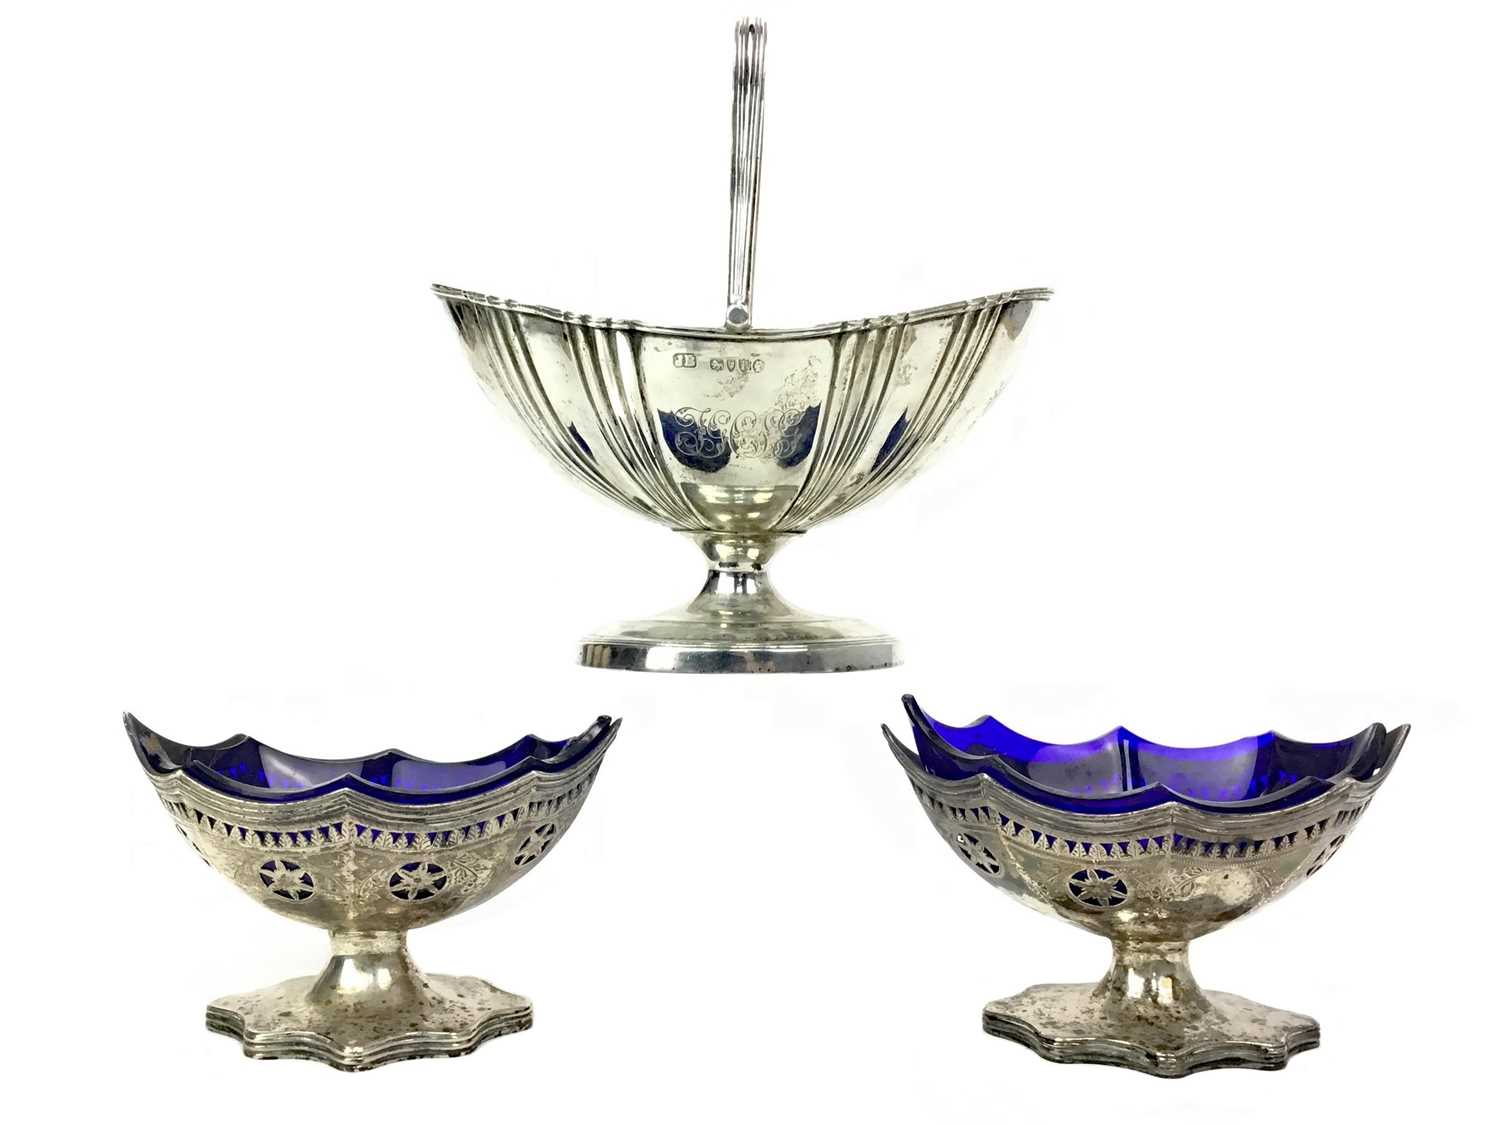 Lot 477 - A VICTORIAN SILVER SUGAR BOWL ALONG WITH A PAIR OF SALTS